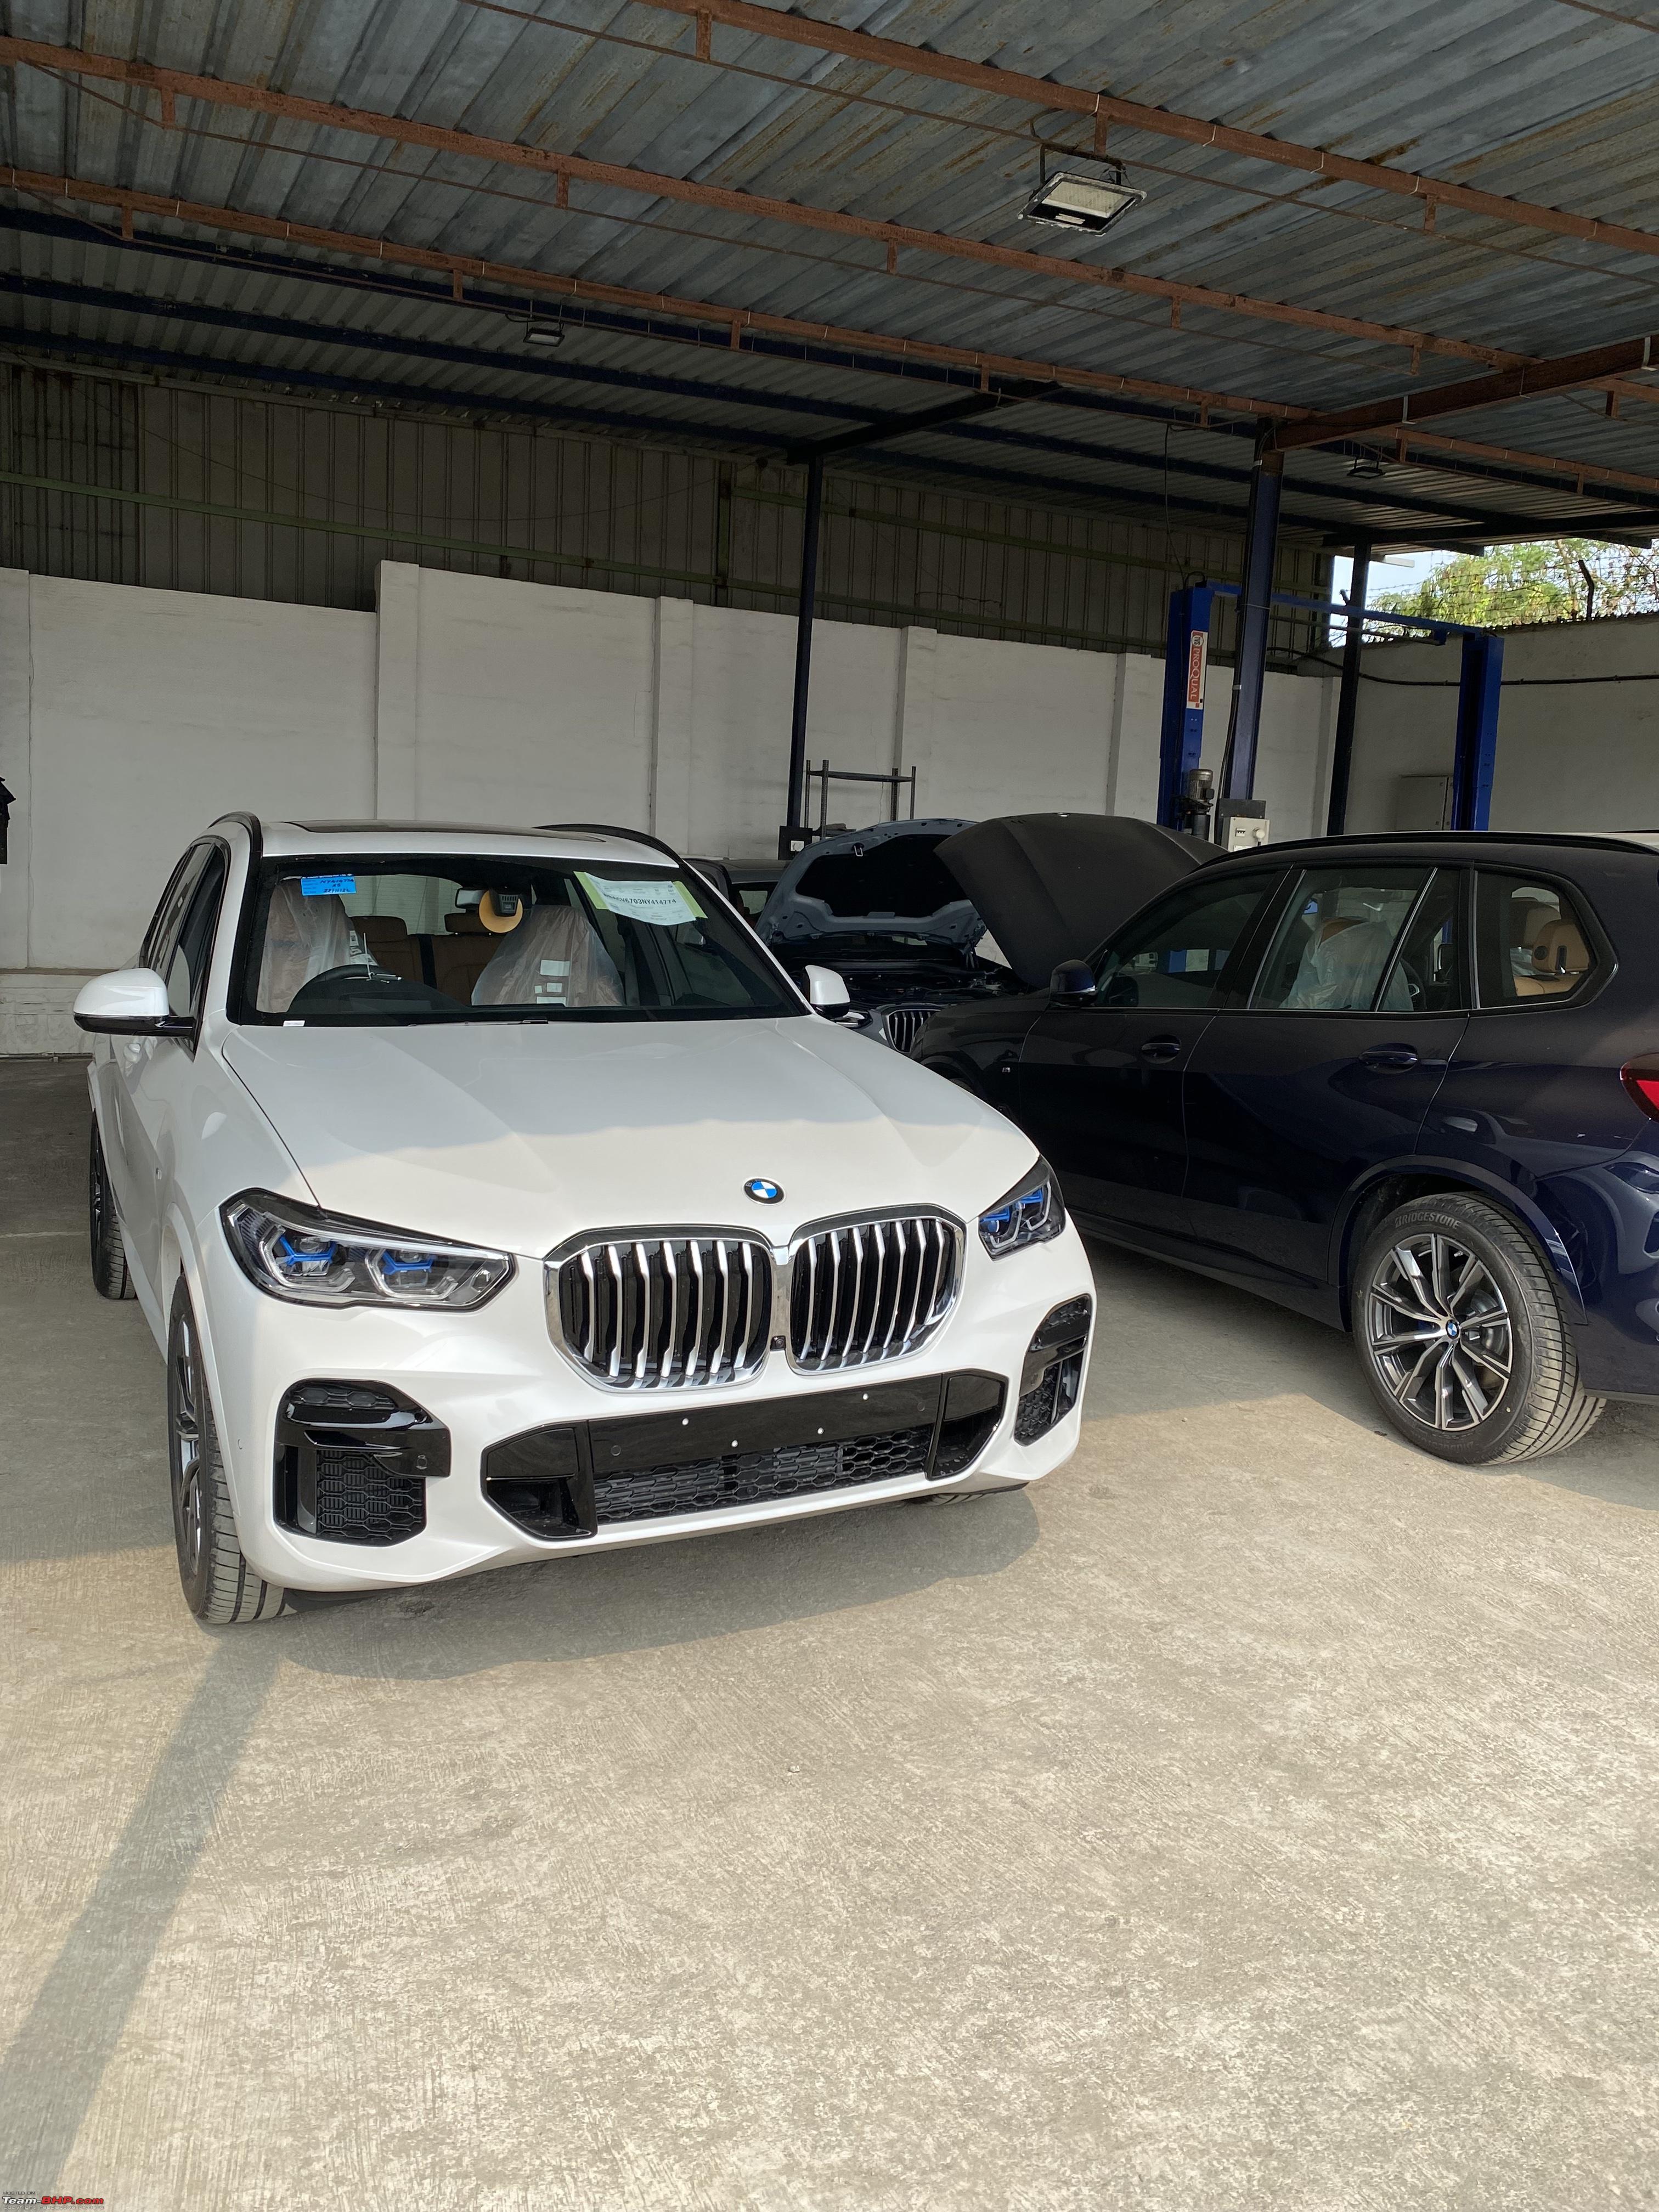 BMW G05 X5  Initial ownership review - Team-BHP